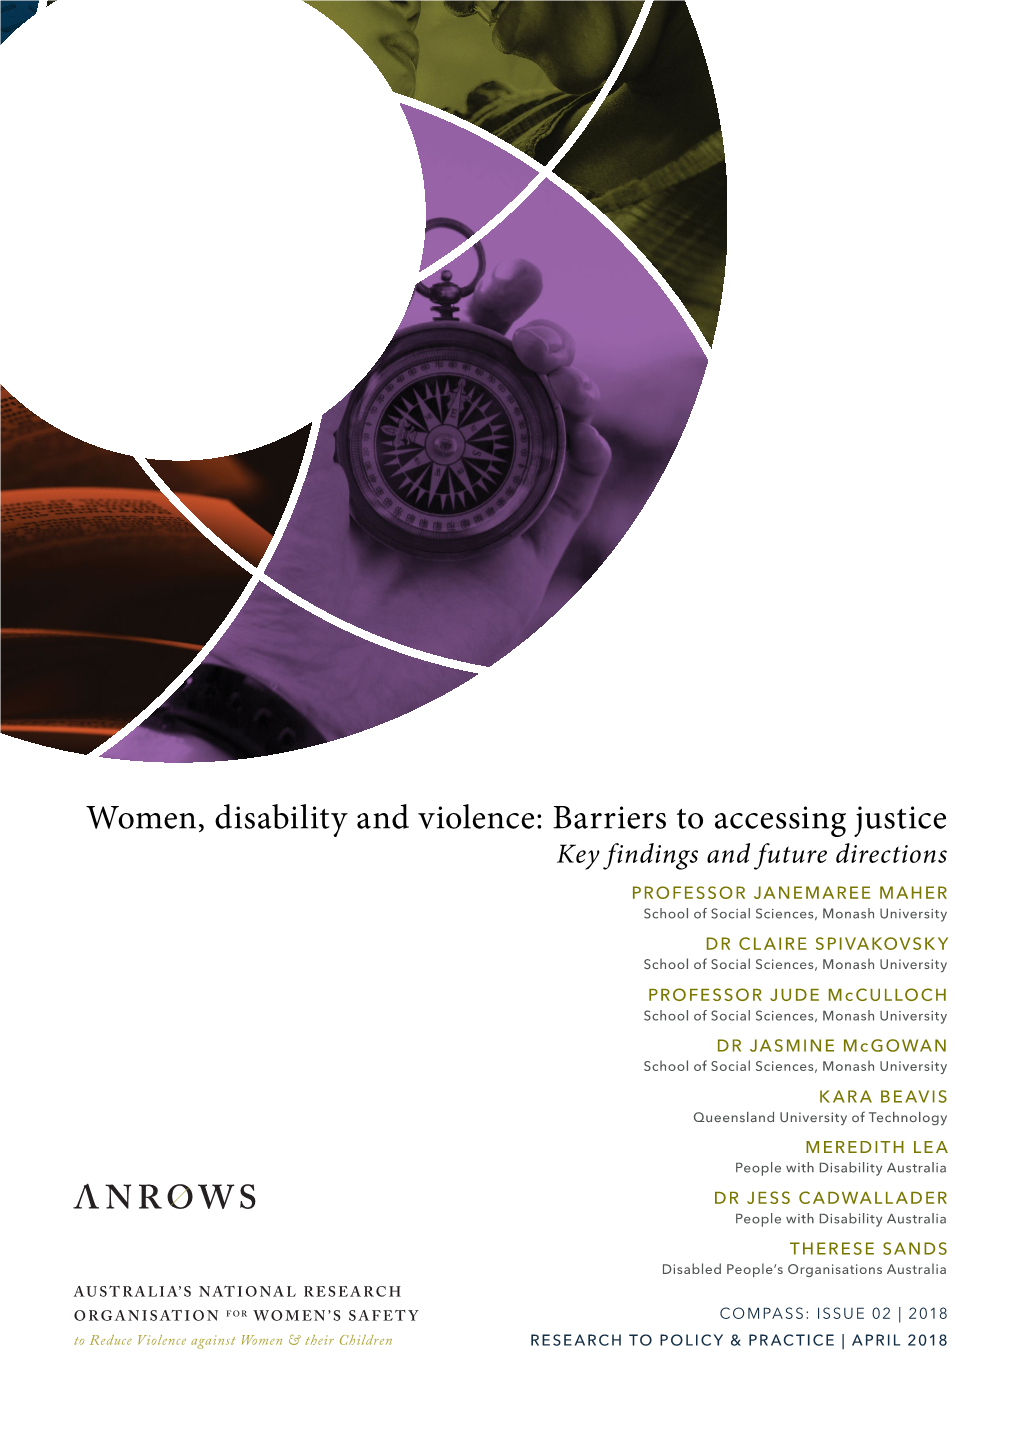 Women, Disability and Violence: Barriers to Accessing Justice